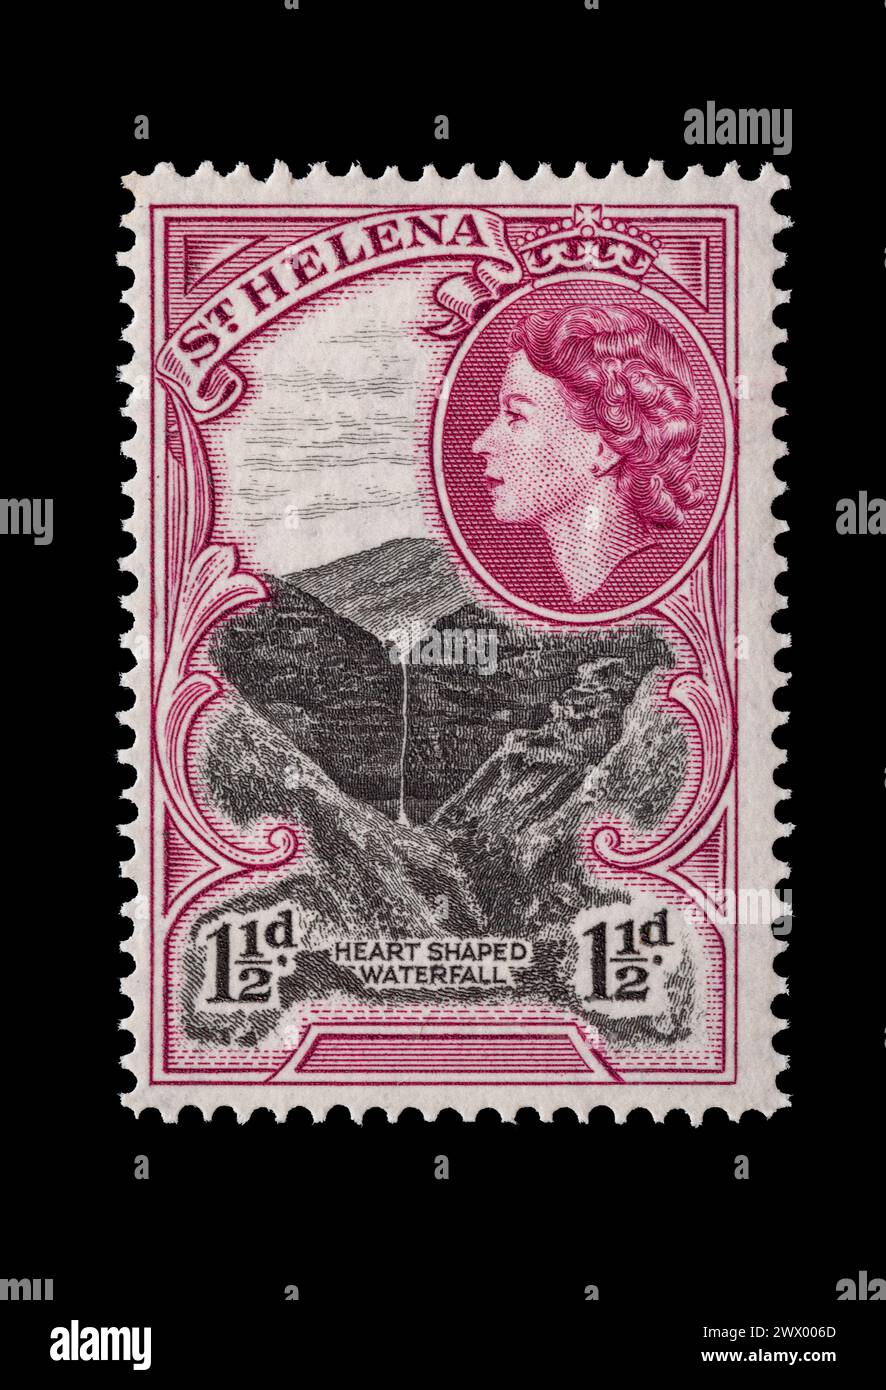 Vintage postage stamp from St Helena circa 1953 Queen Elizabeth II. Artwork showing the heart shaped falls. Stock Photo